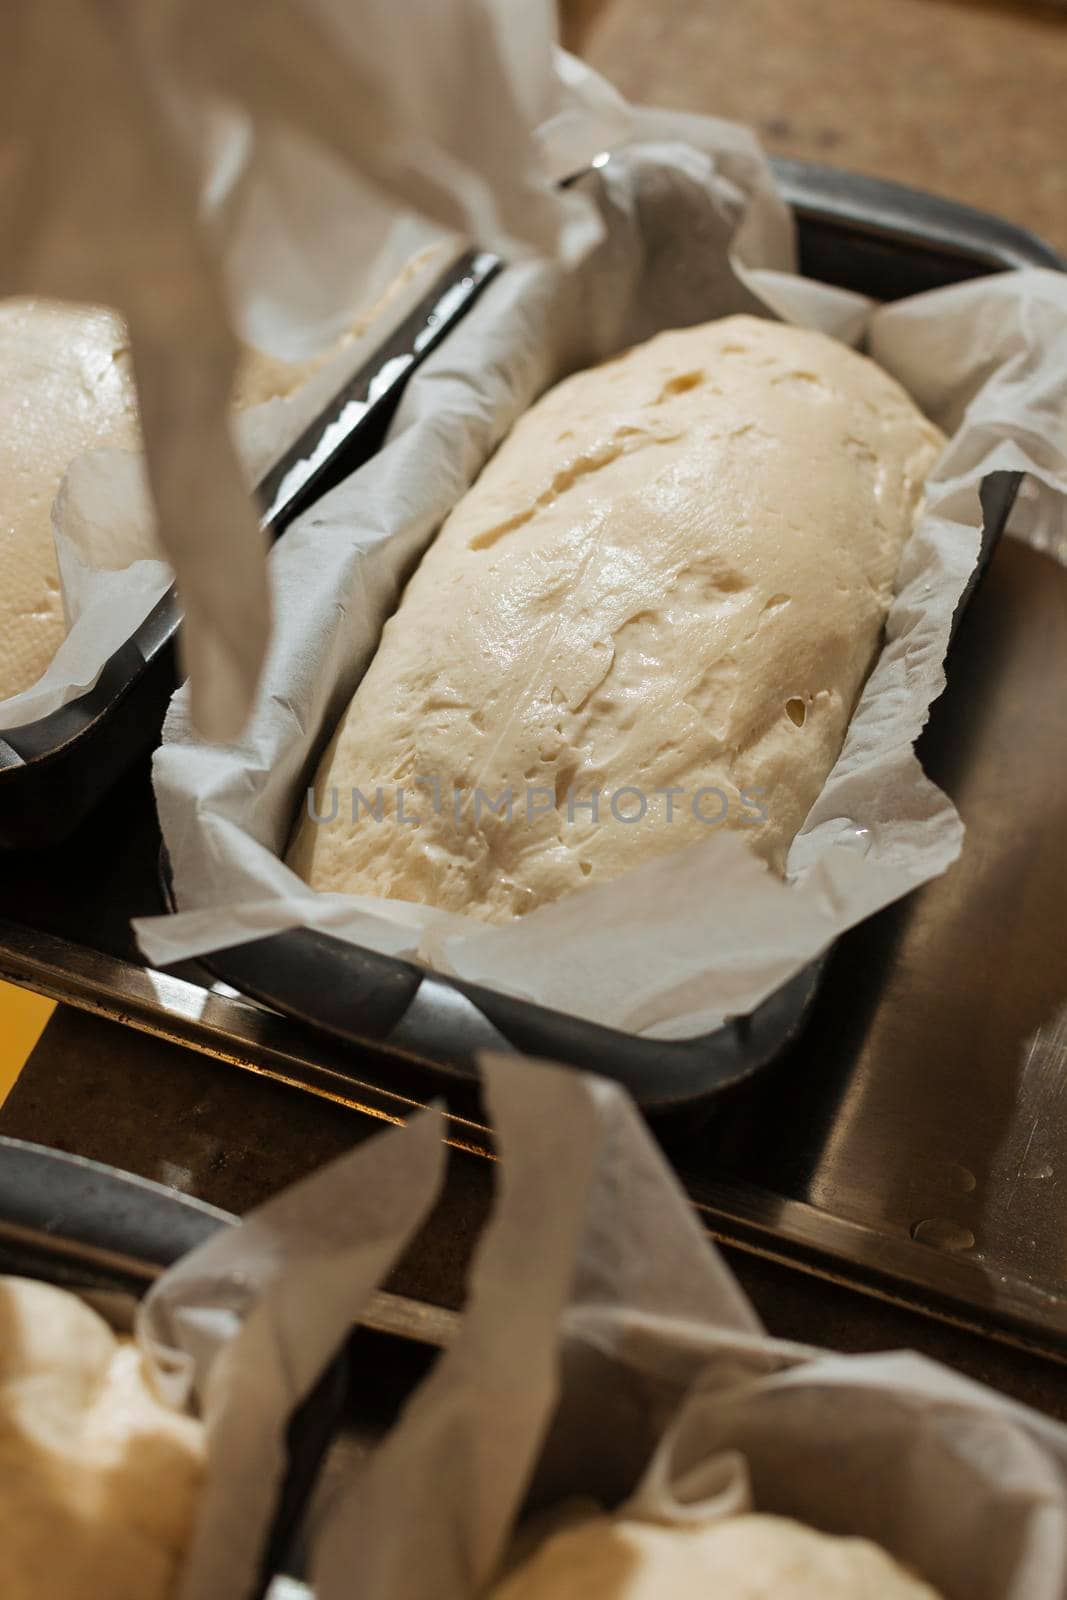 Homemade bread dough with olive oil, in a venetian restaurant